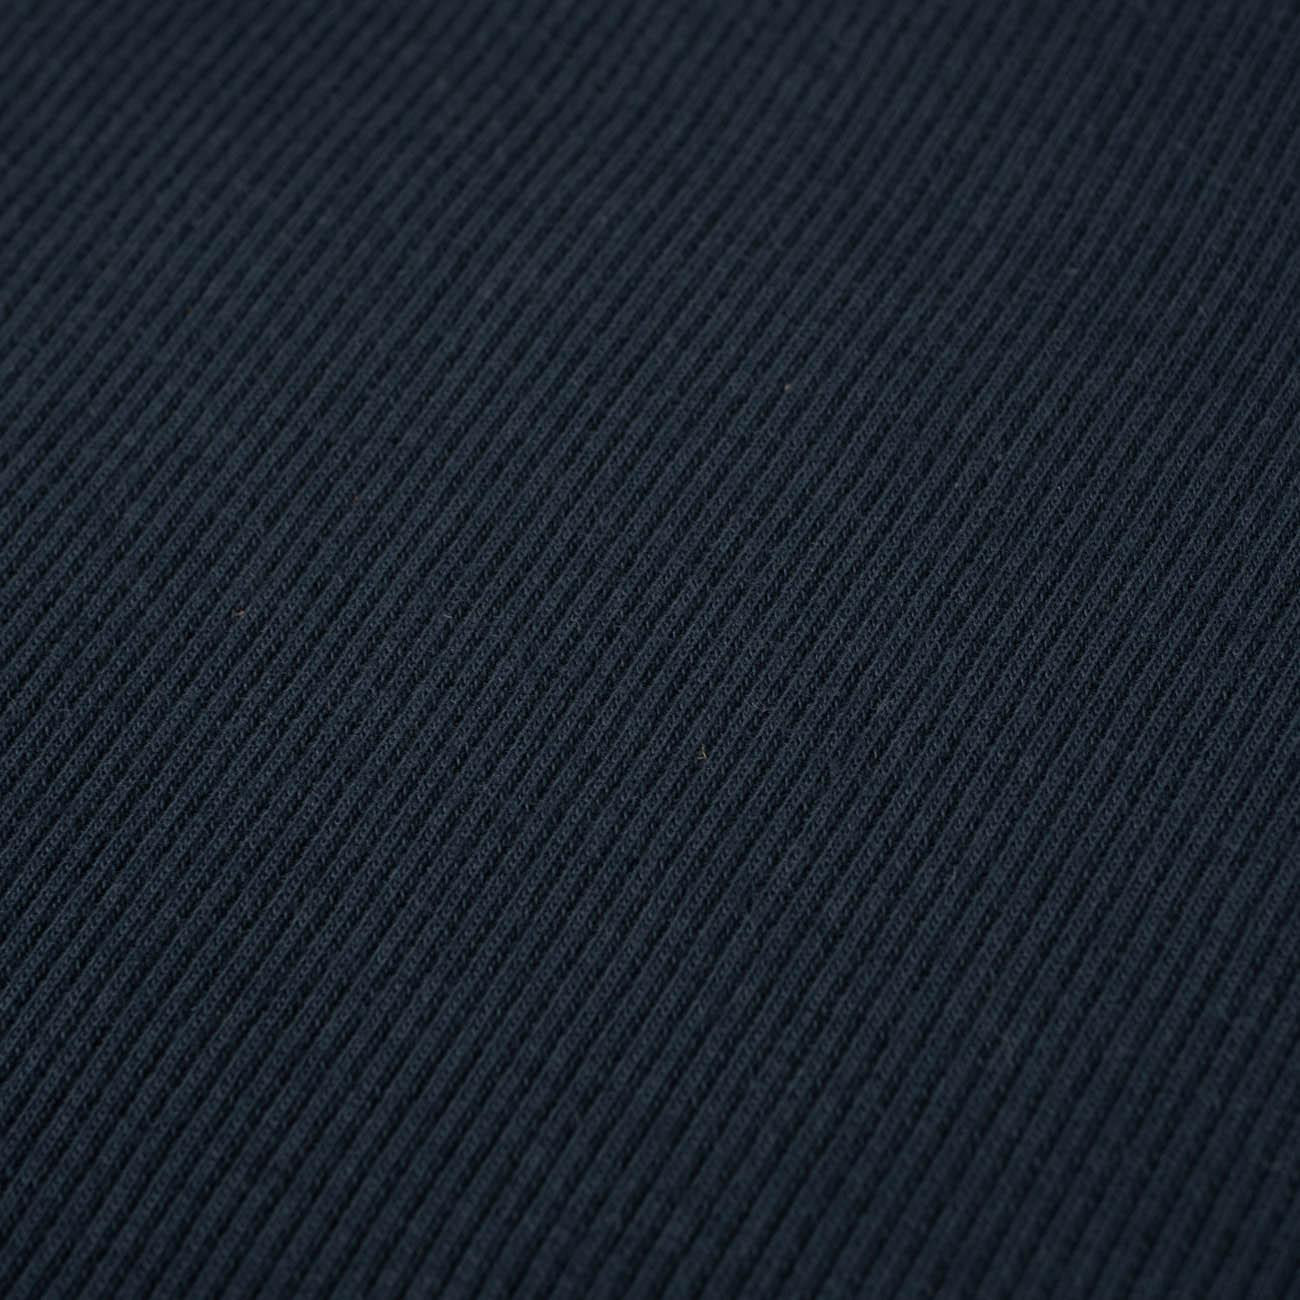 D-129 ANTHRACITE - Ribbed knit fabric